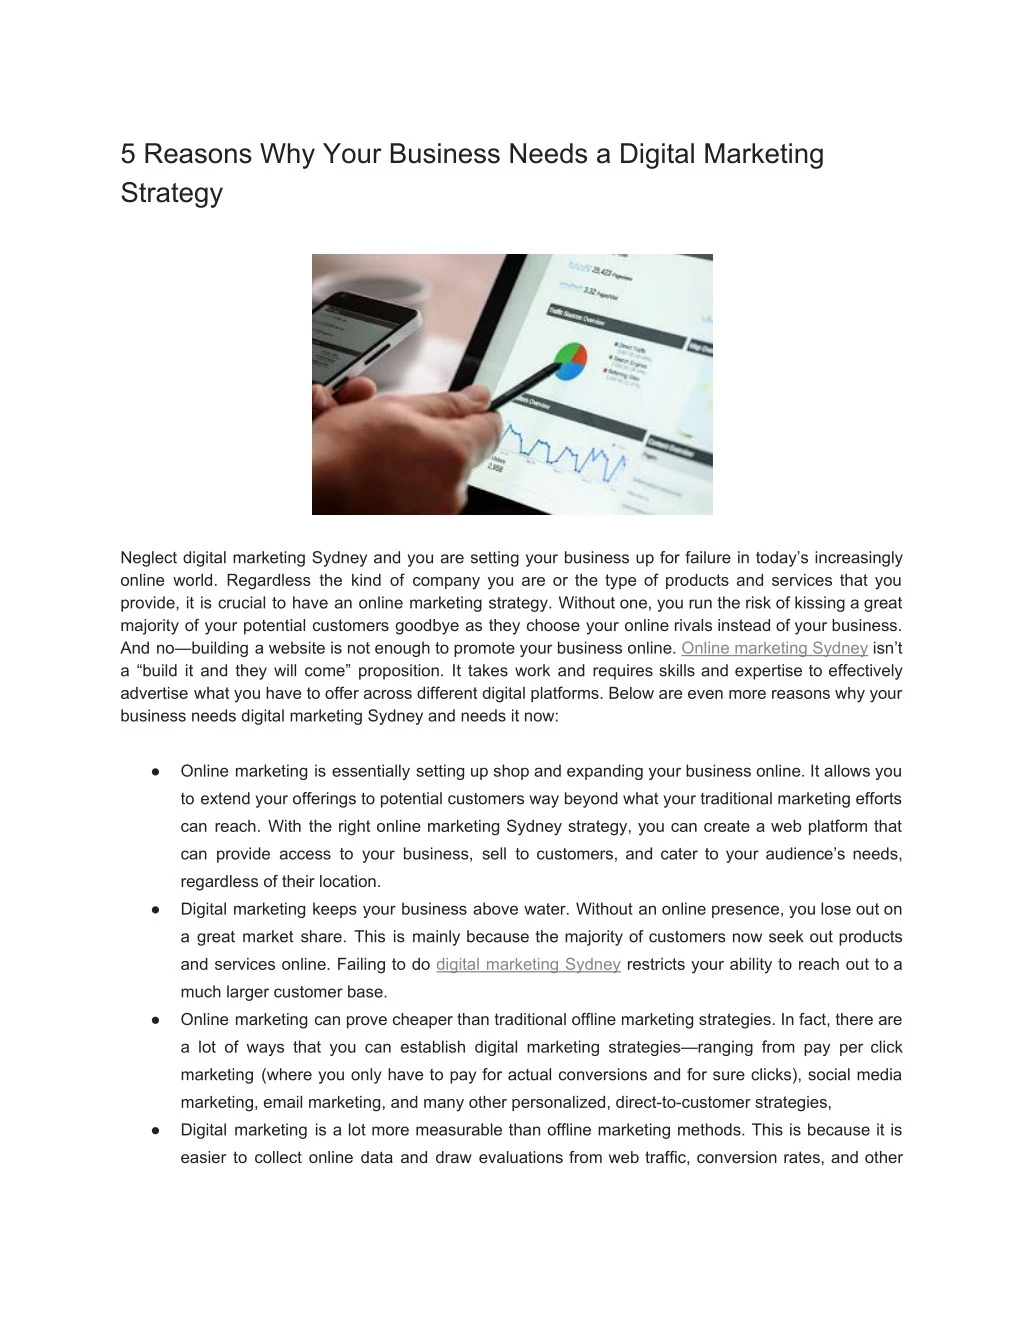 5 reasons why your business needs a digital